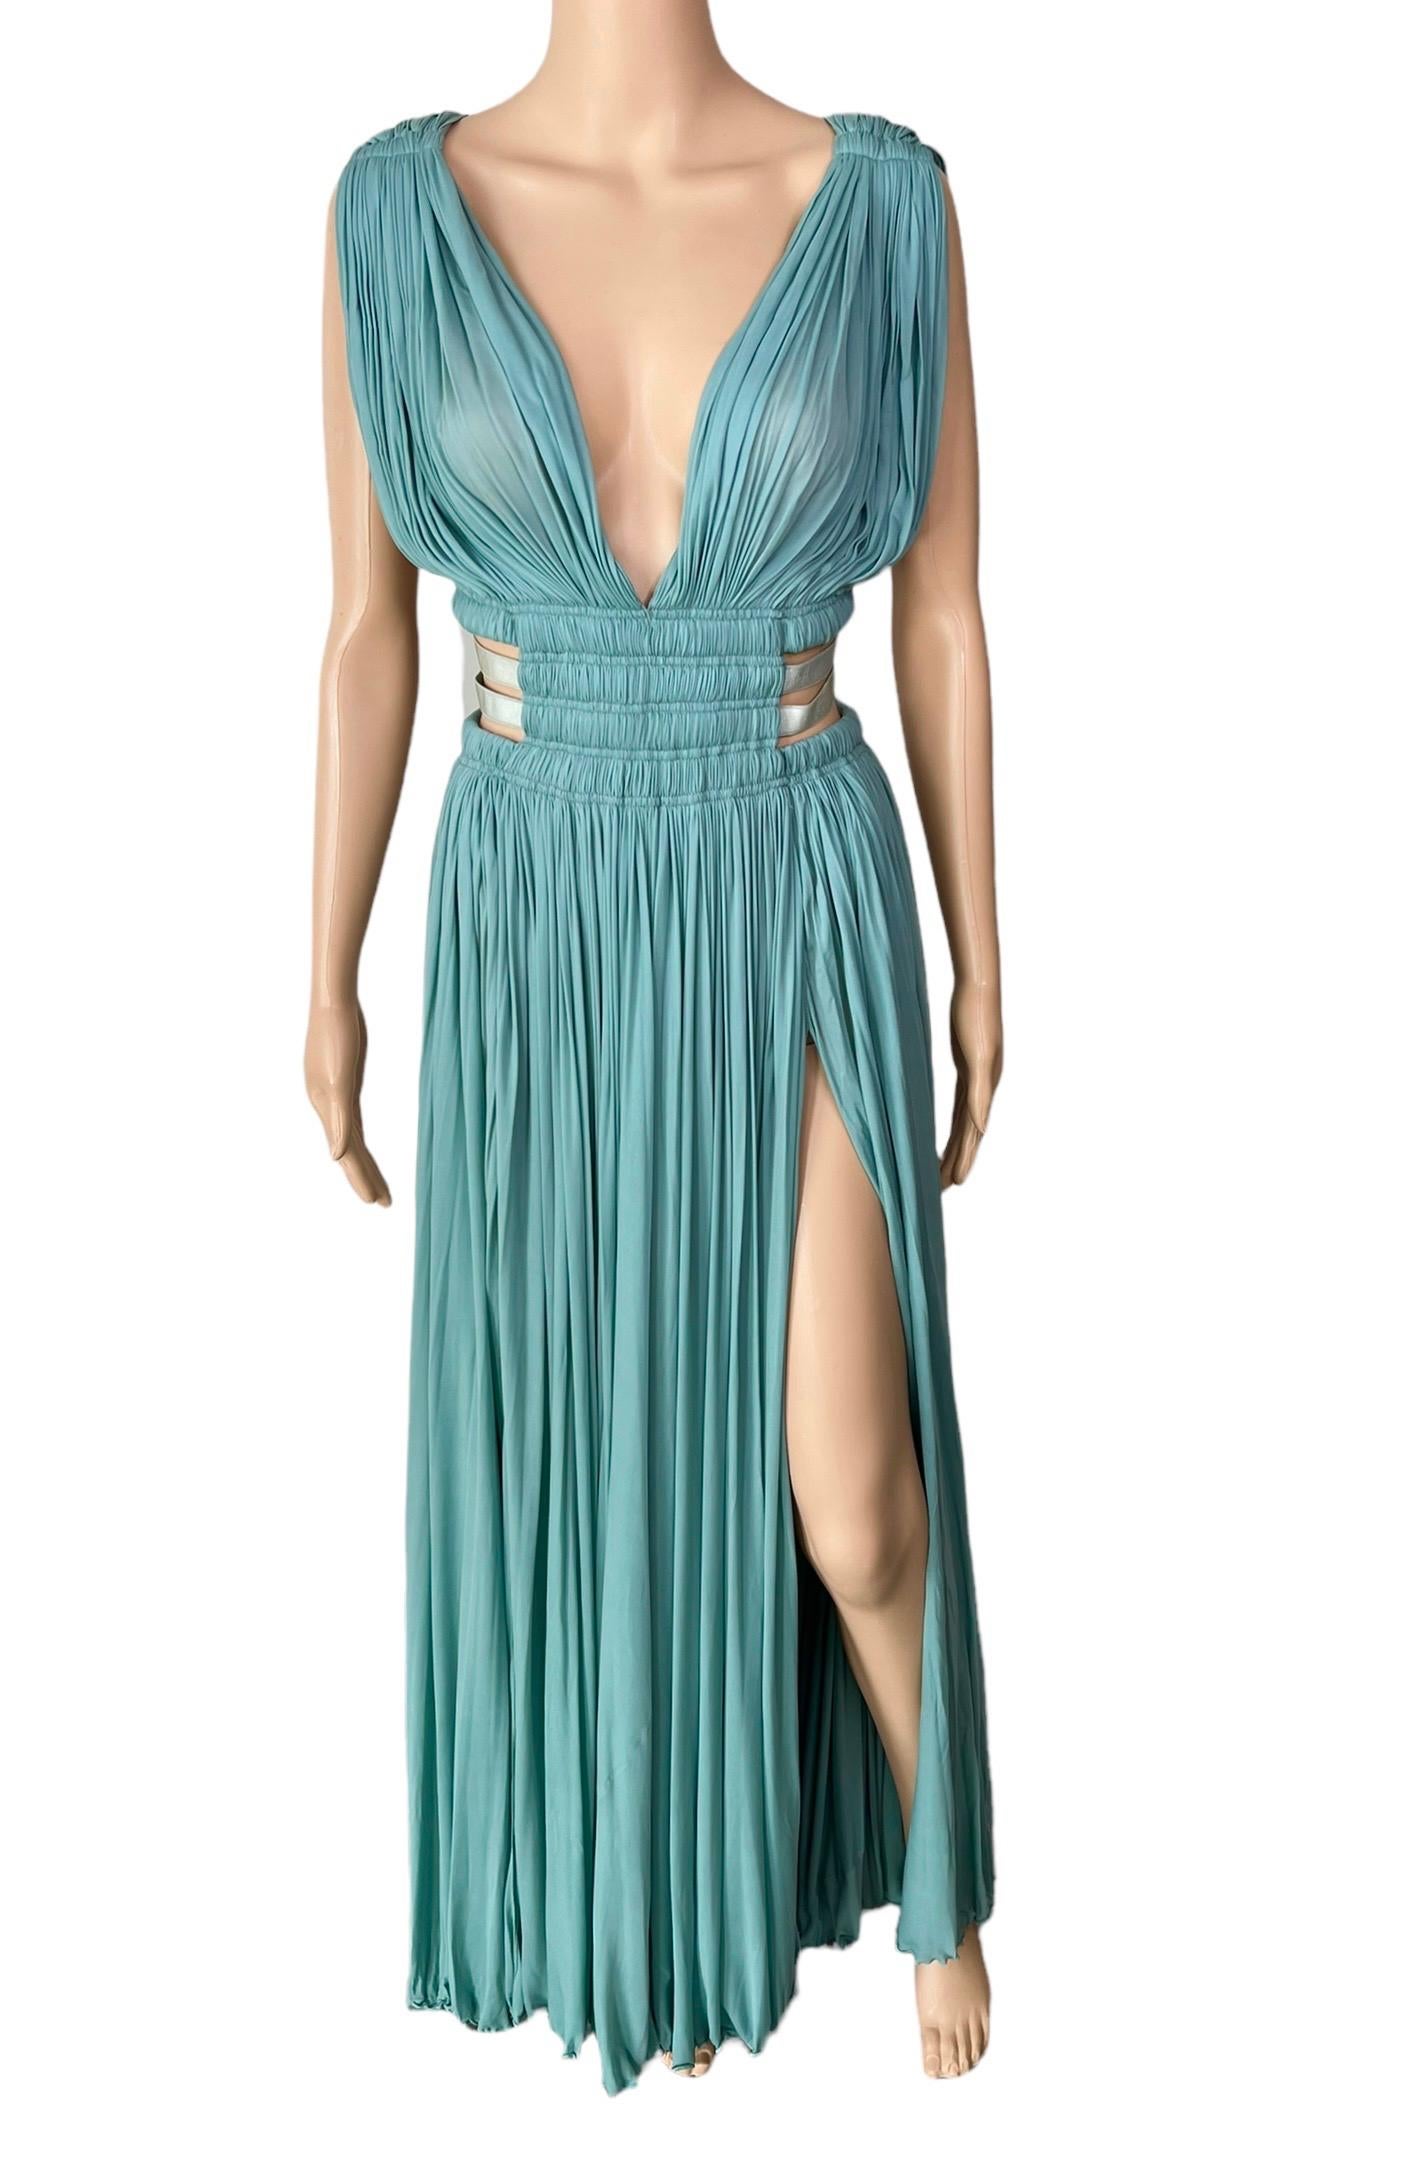 Azzedine Alaïa c.2004 Semi-Sheer Cutout Ruched Slits Gown Maxi Evening Dress In Excellent Condition For Sale In Naples, FL